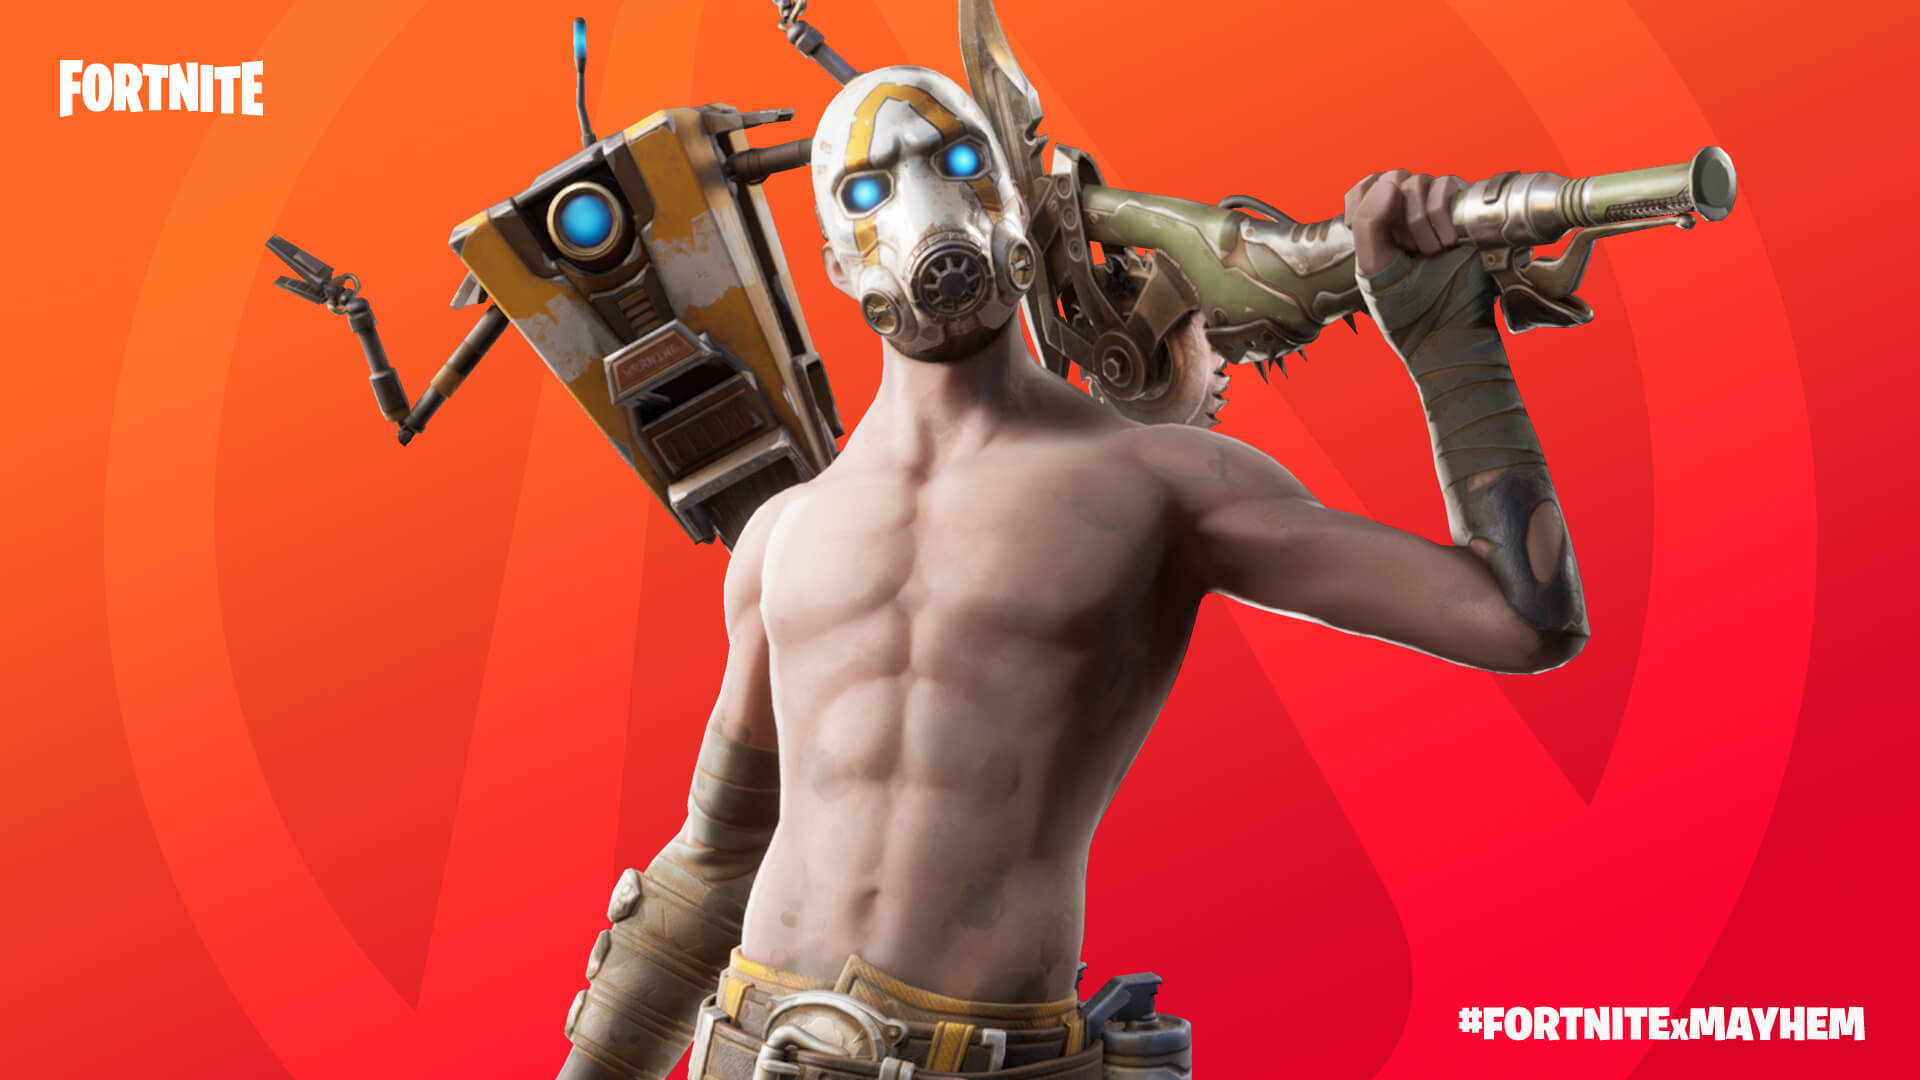 How to claim your free Psycho Bundle in Fortnite when buying